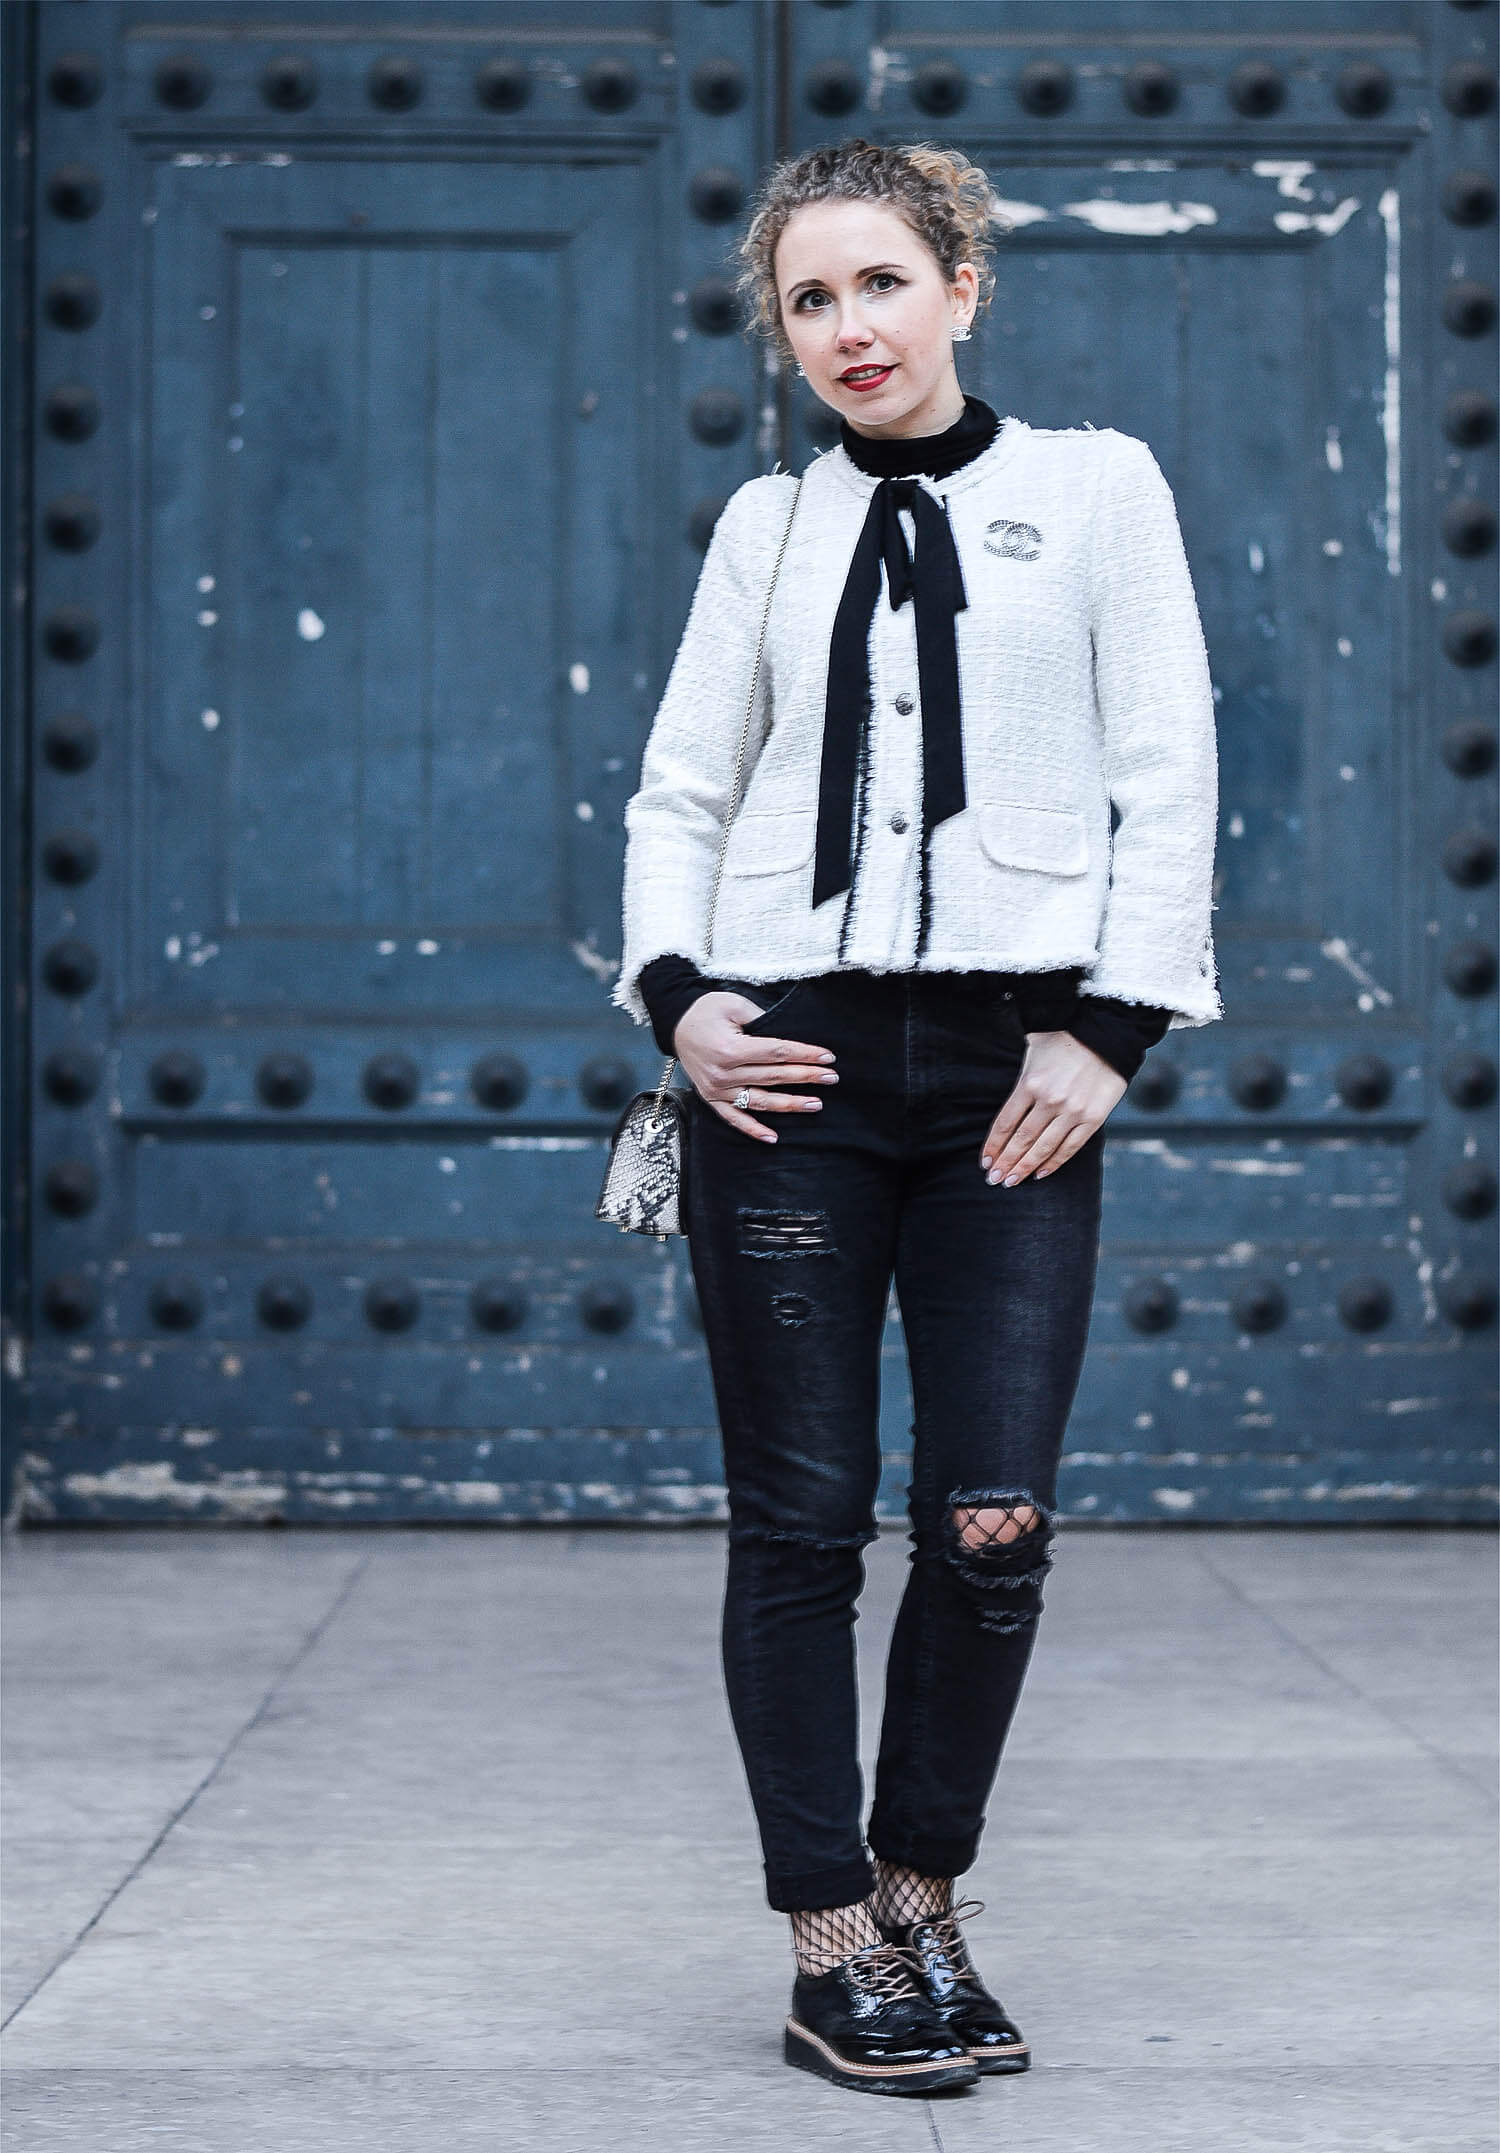 Kationette-fashionblog-nrw-Outfit-Zara-Tweed-Jacket-Ripped-Jeans-Chanel-Jewelry-Paris-streetstyle